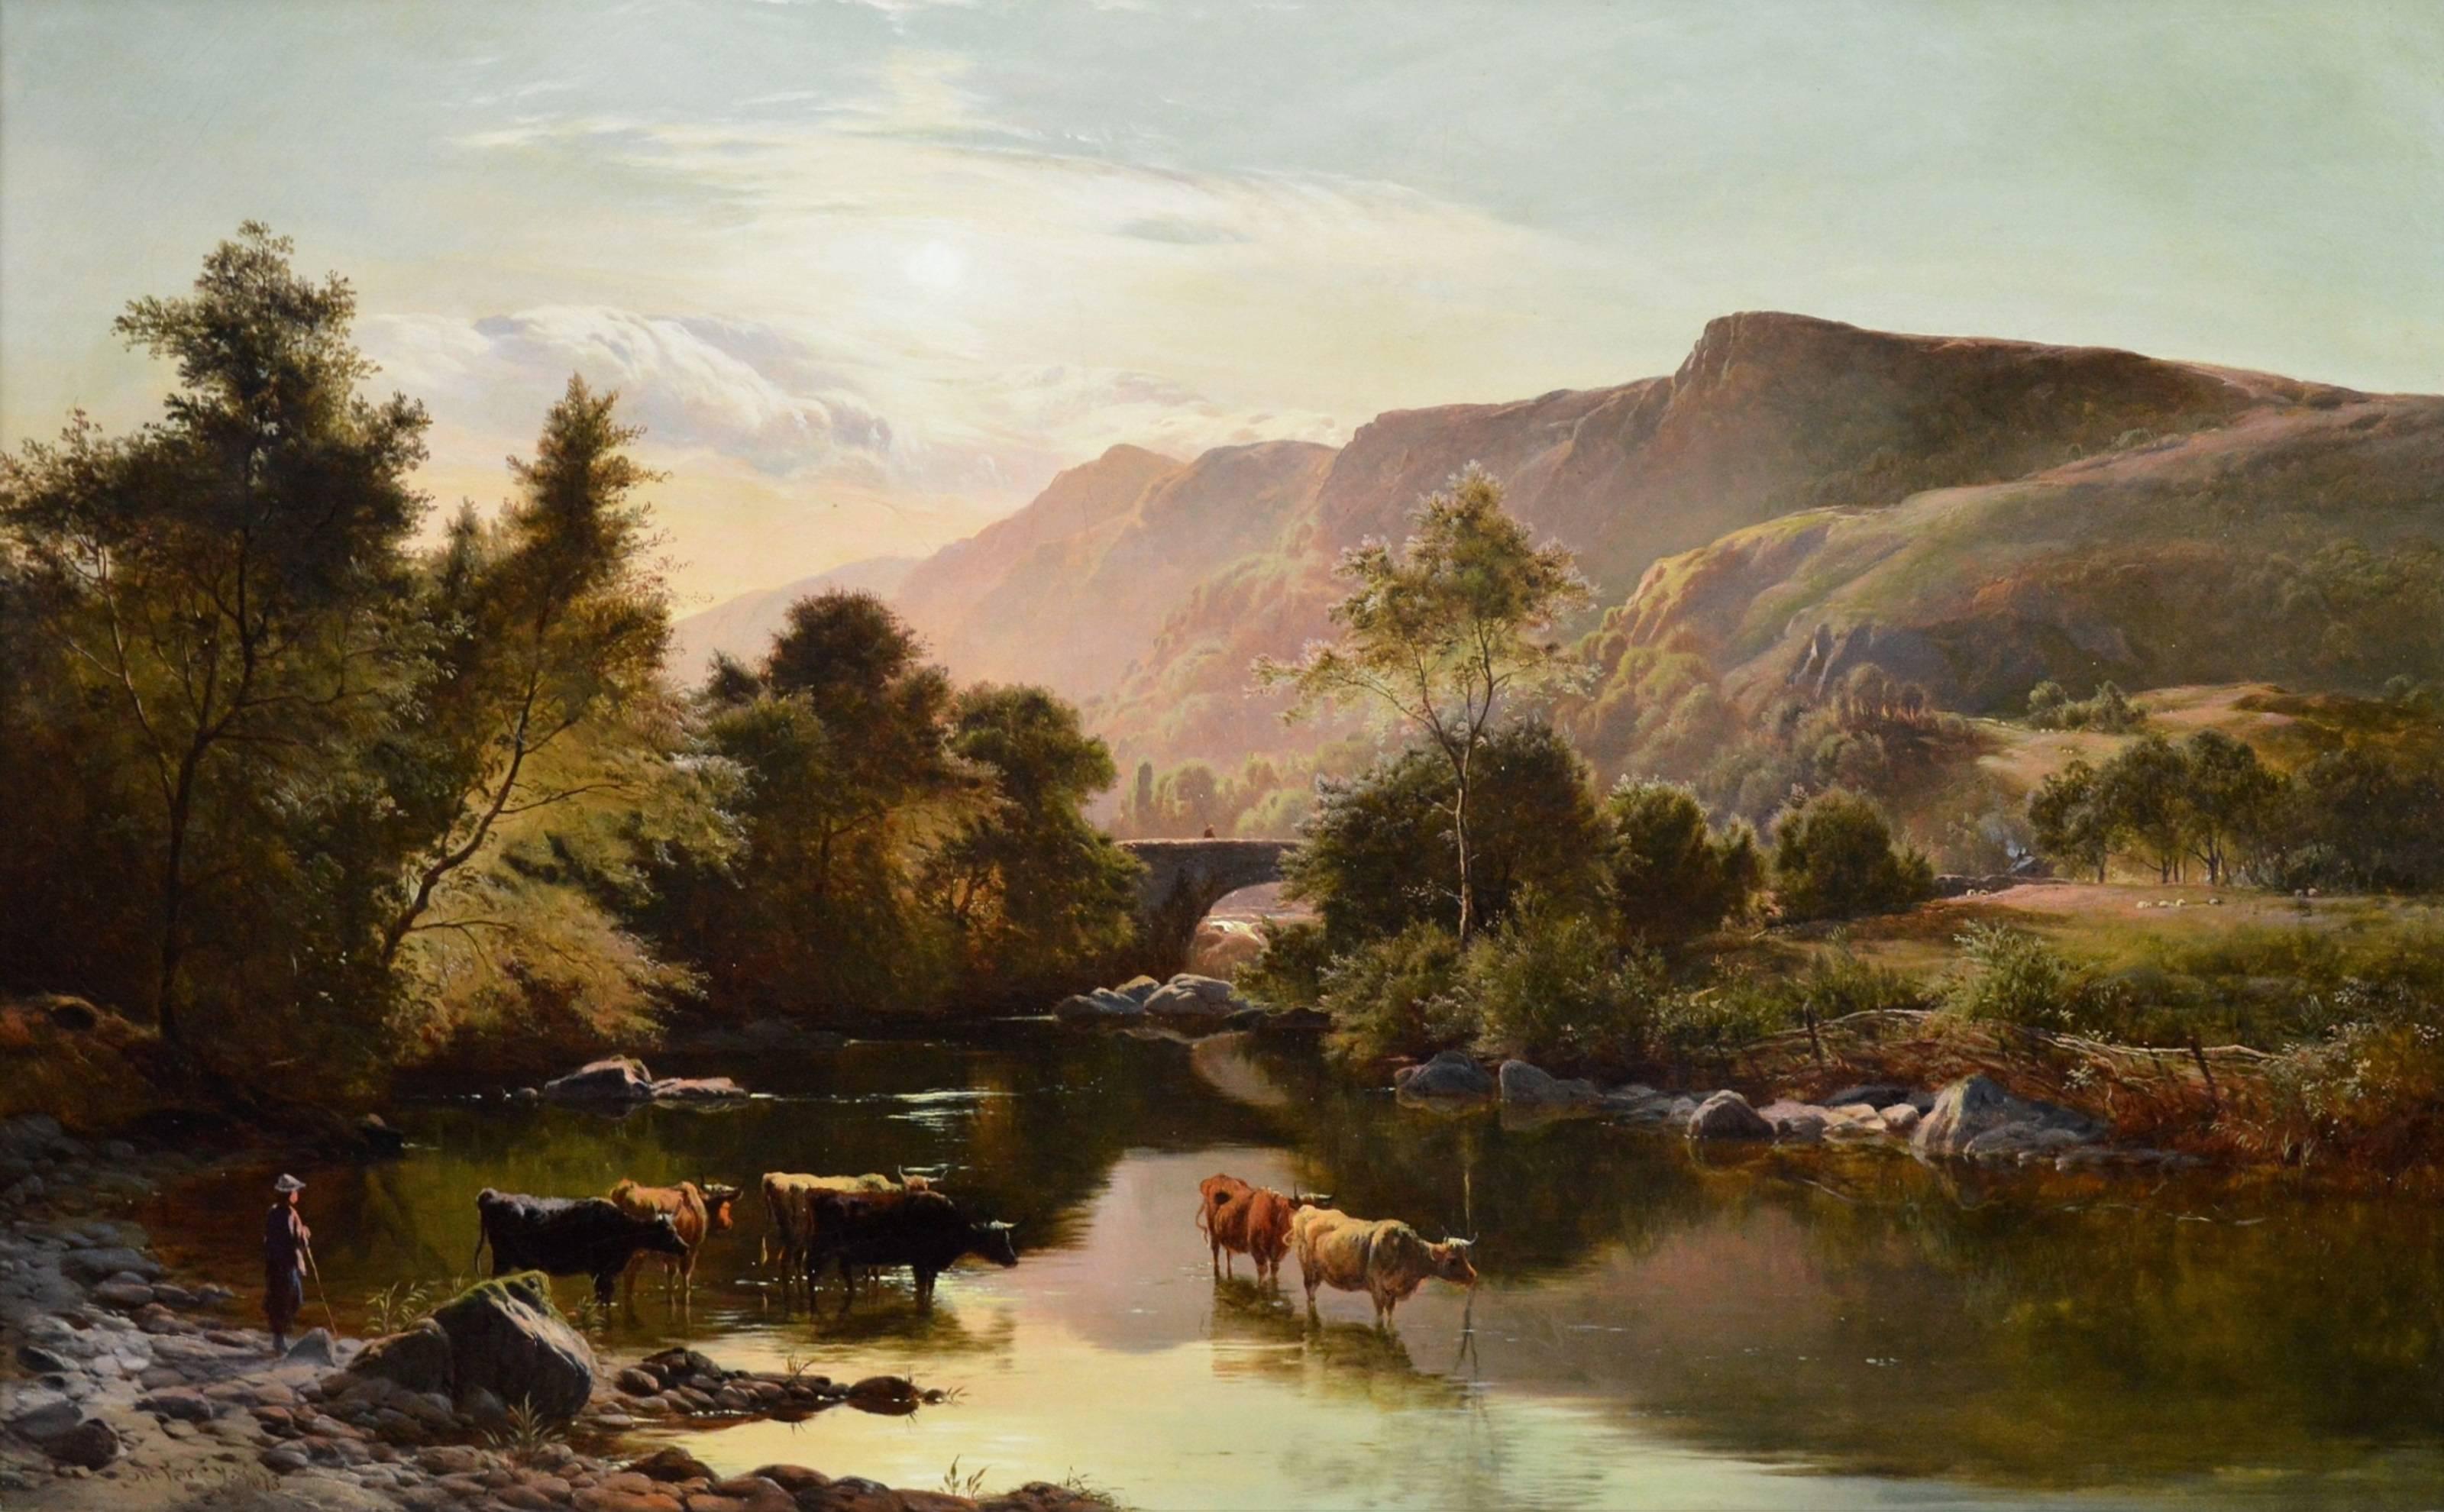 Betws-y-Coed, North Wales - 19th Century Oil Painting - Sidney Richard Percy 1